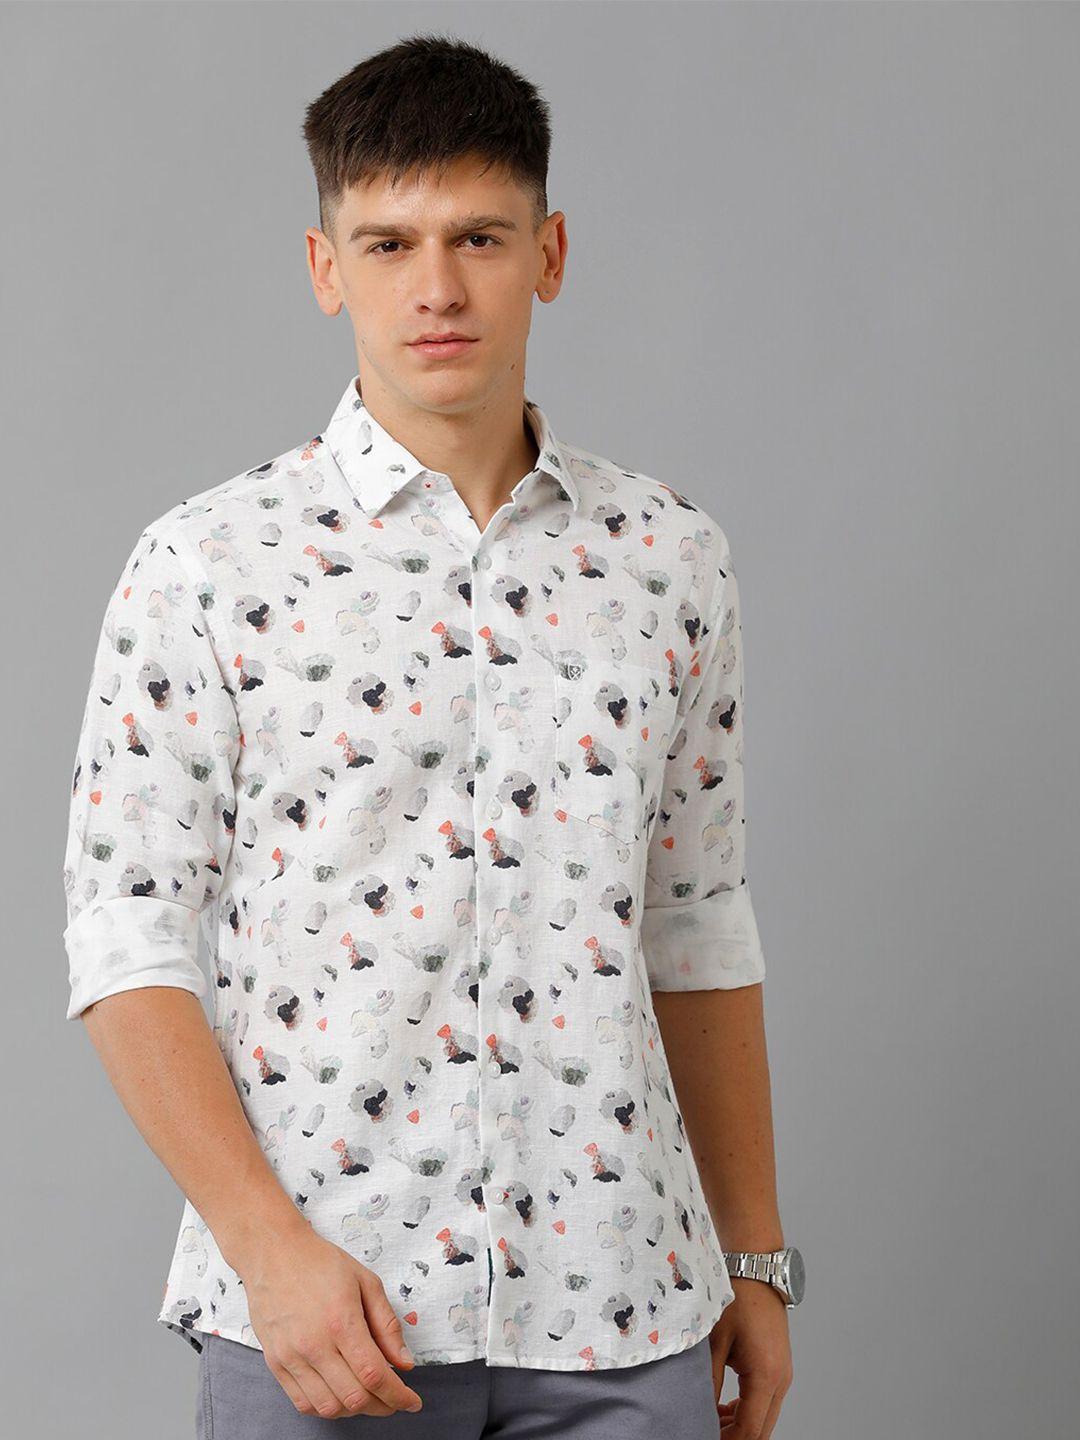 linen-club-abstract-printed-pure-linen-casual-shirt